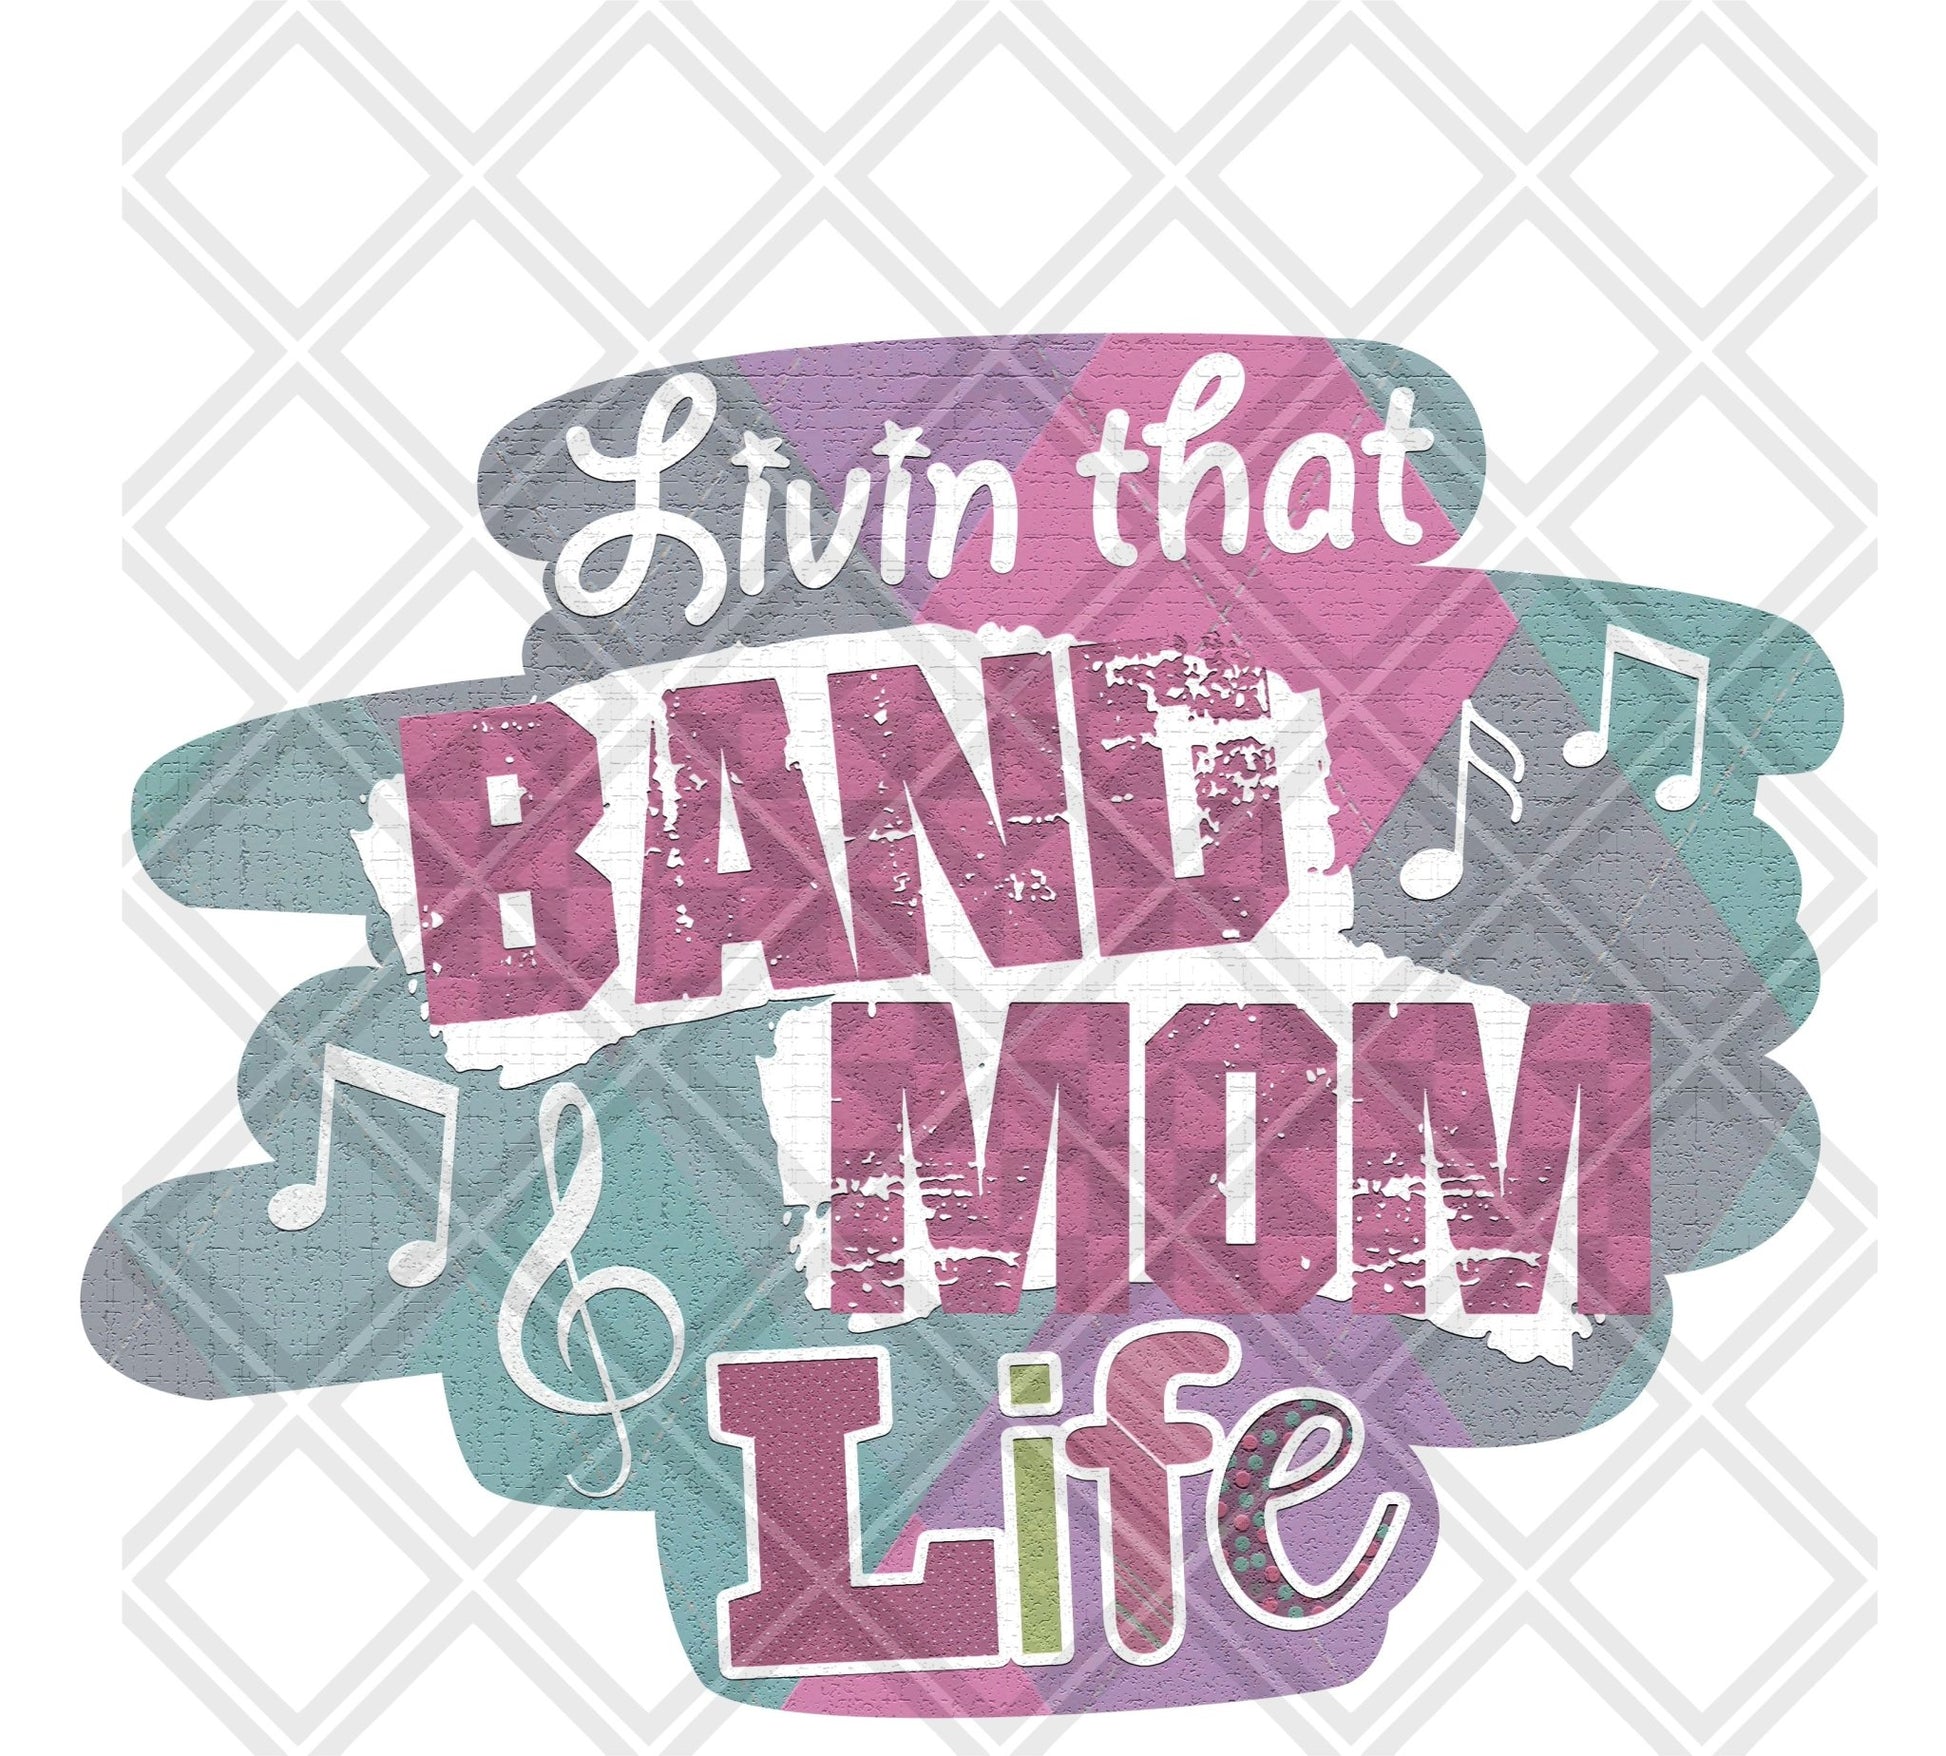 Livin that brand mom life png Digital Download Instand Download - Do it yourself Transfers